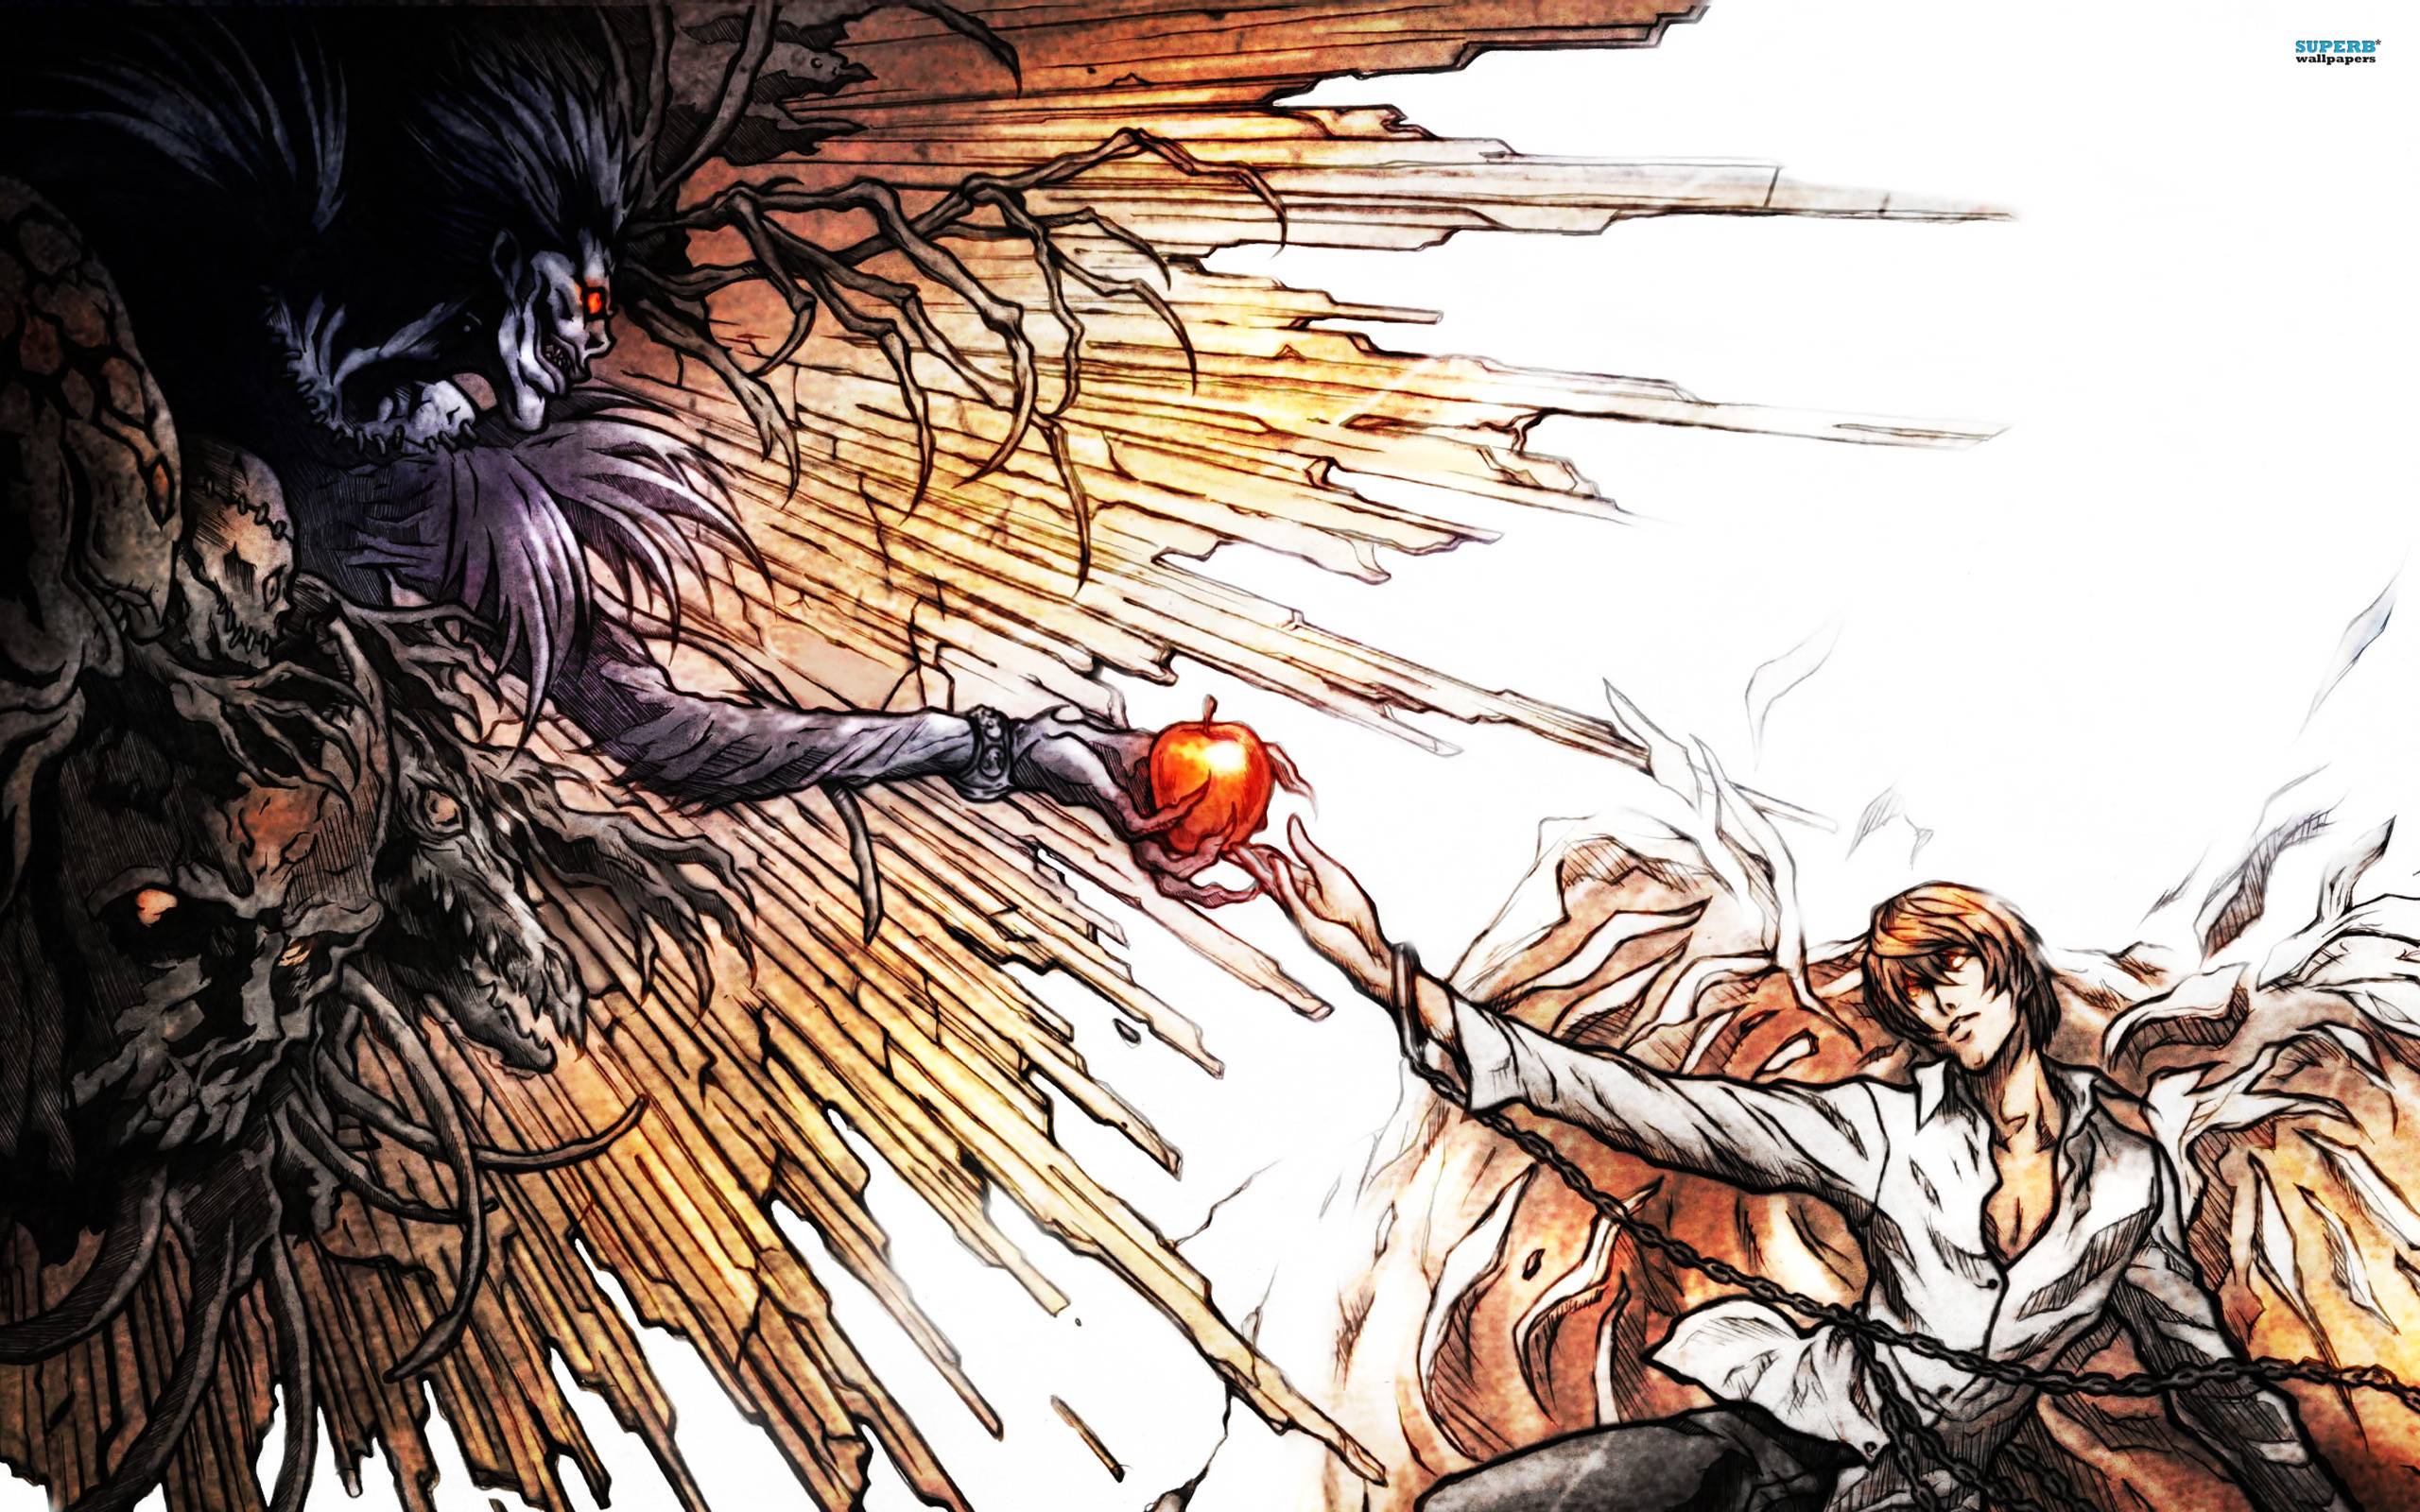 Death Note Wallpapers - Wallpaper Cave